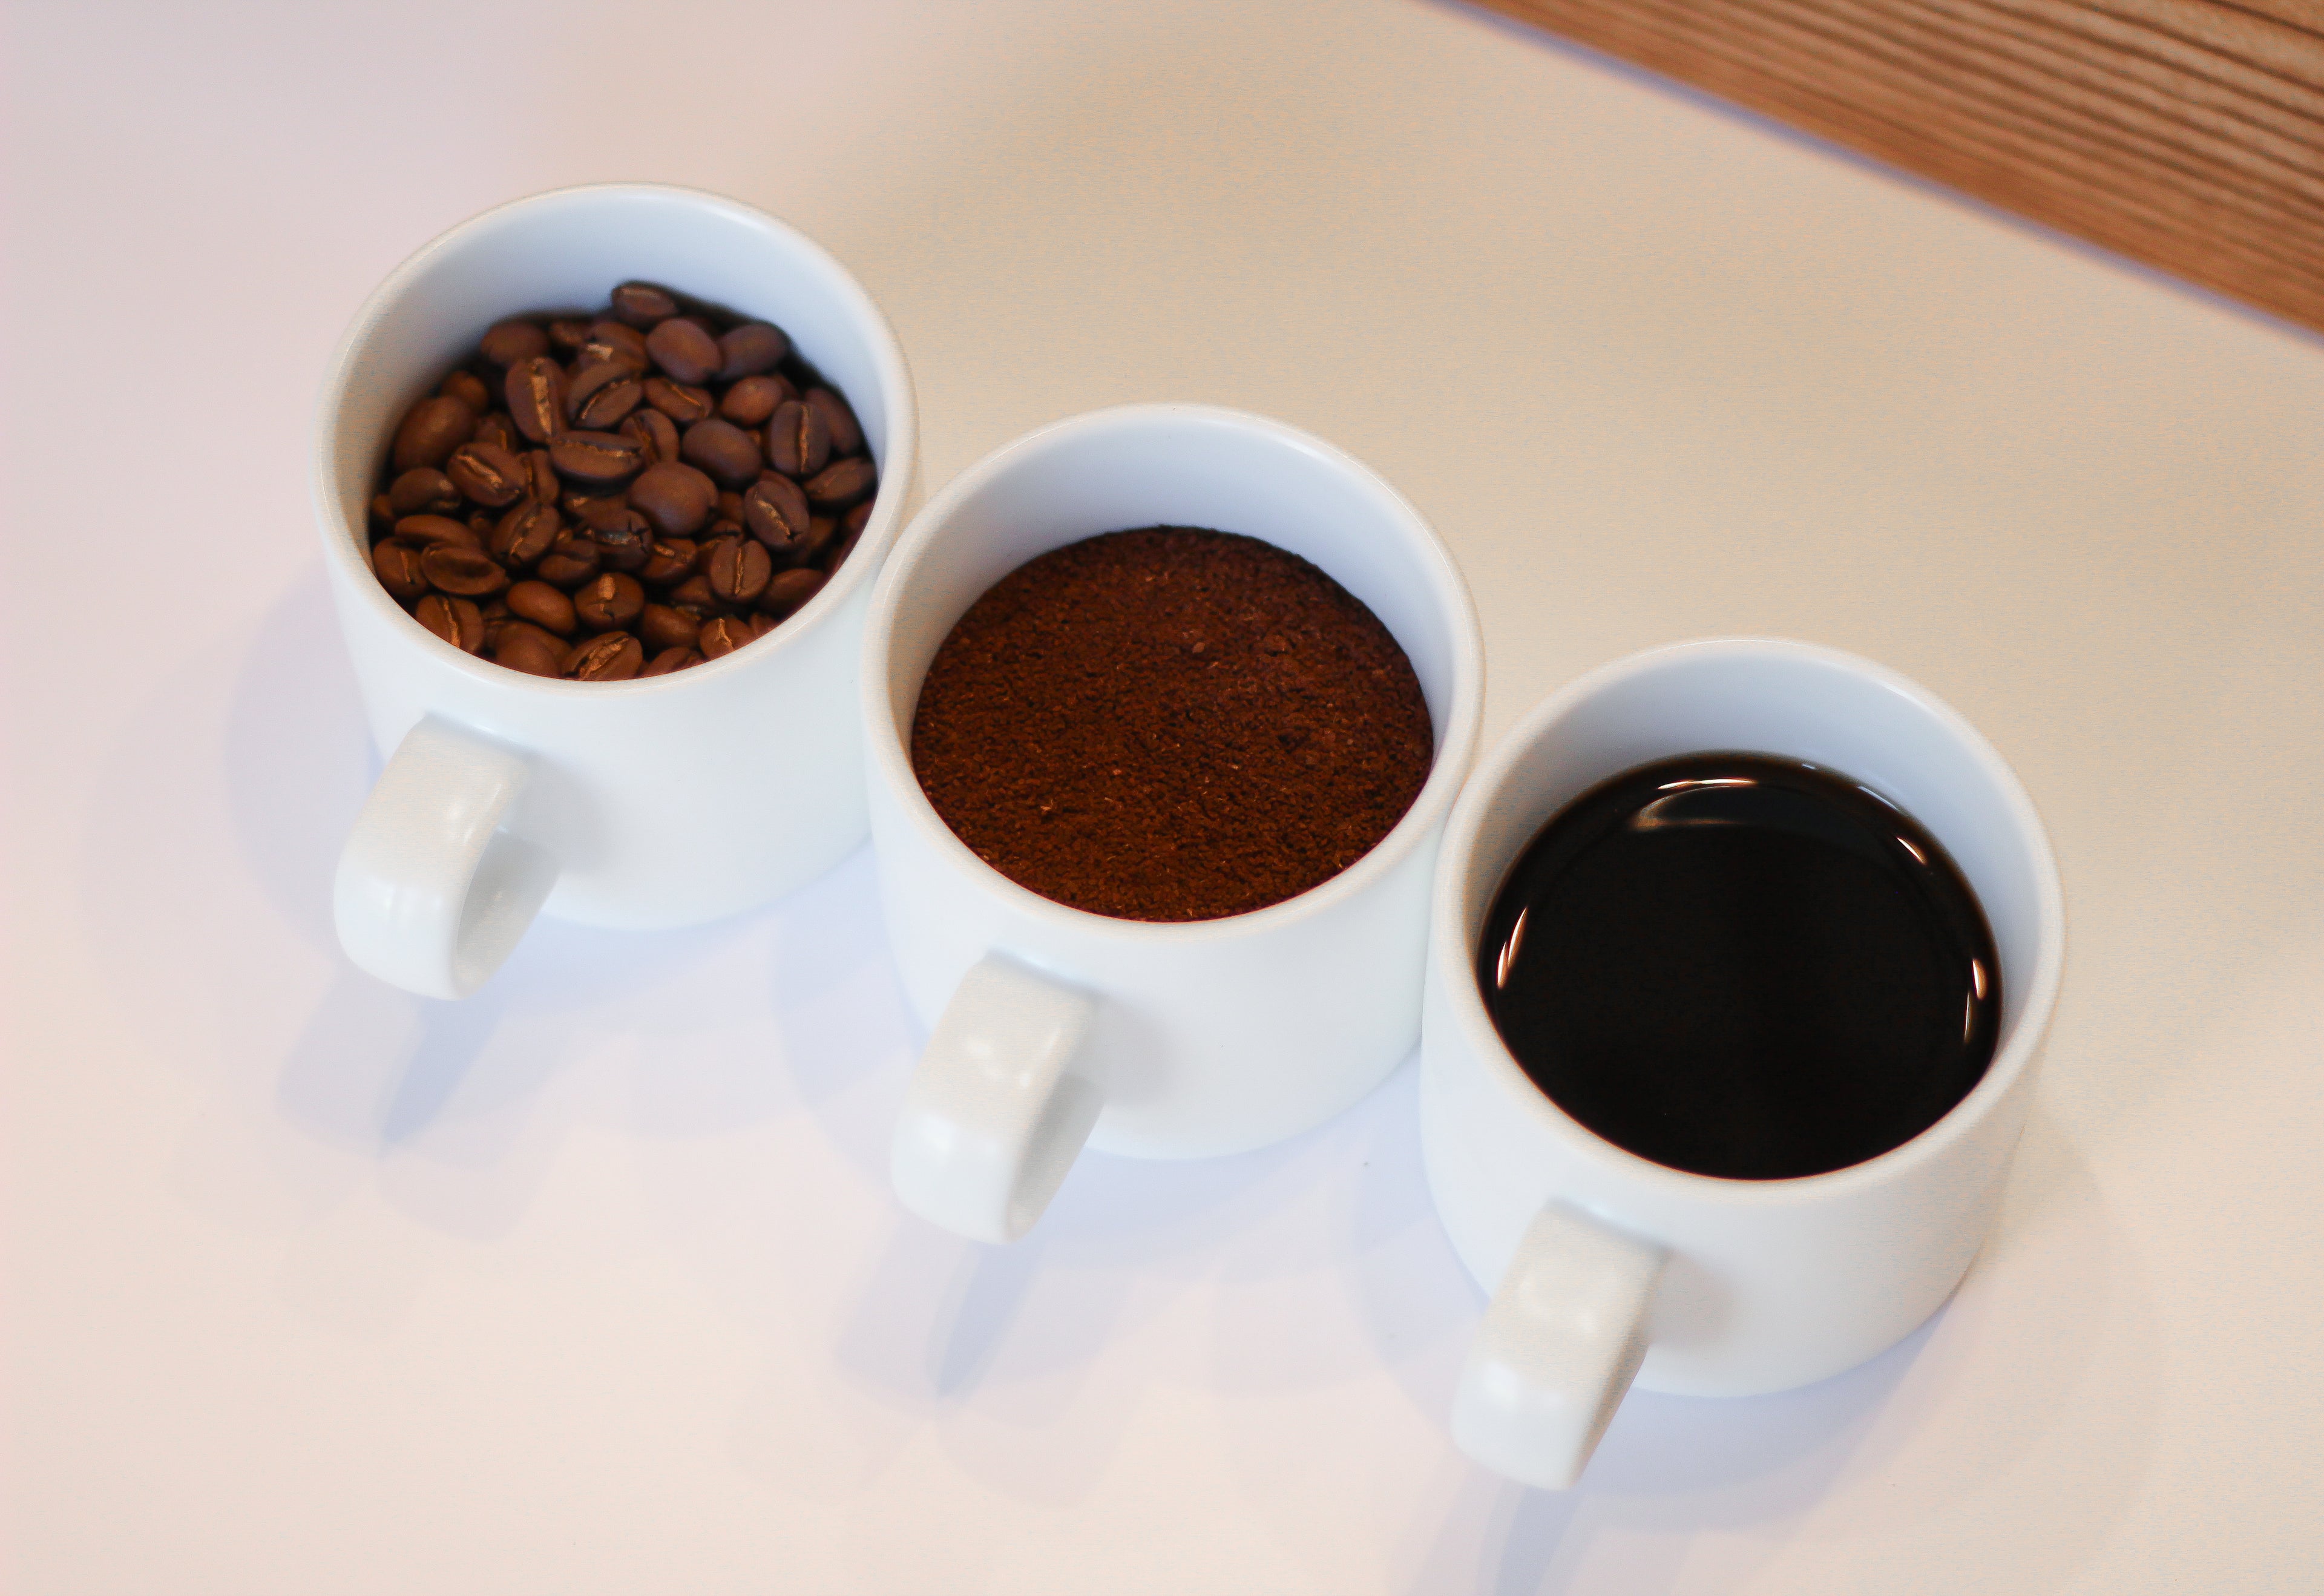 3 white mugs filled with whole coffee beans, ground coffee beans, and brewed coffee